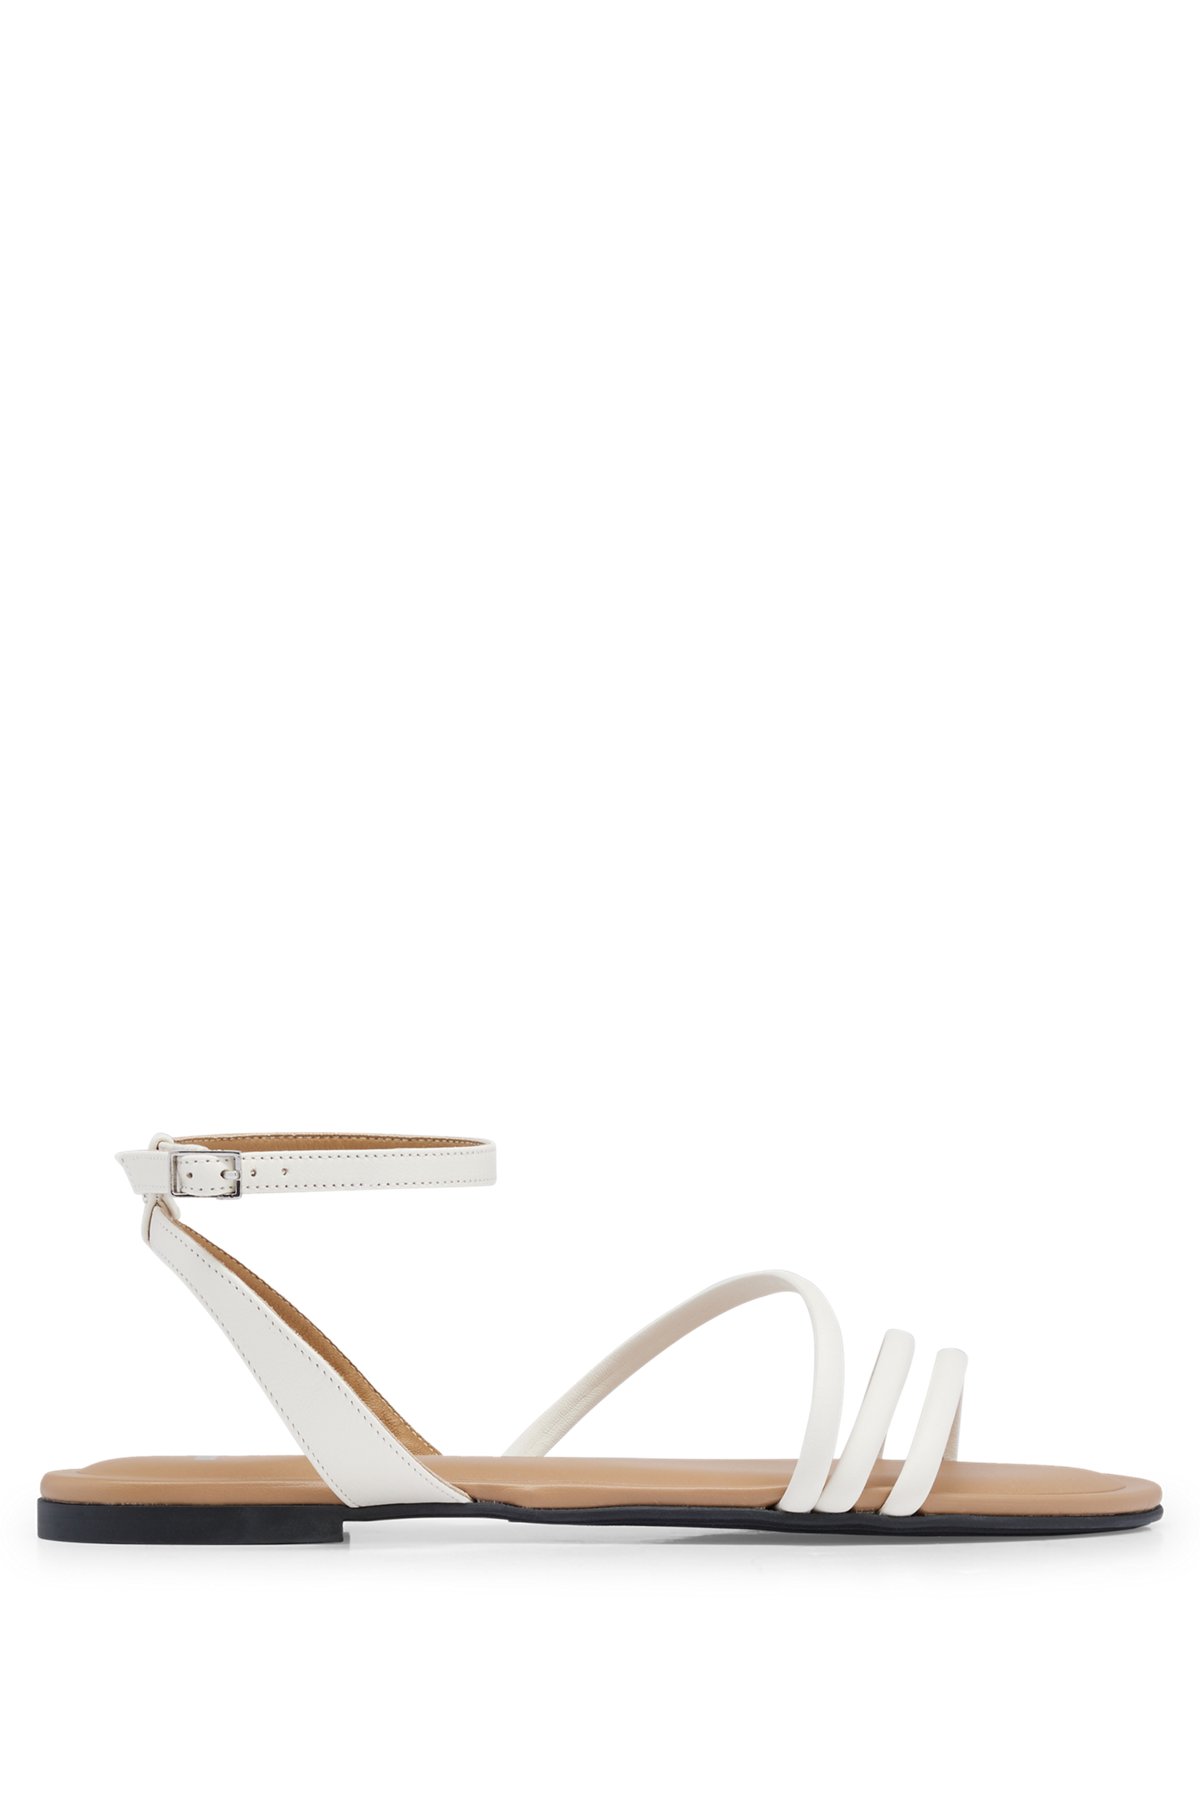 Nappa-leather strappy sandals with flat sole, White